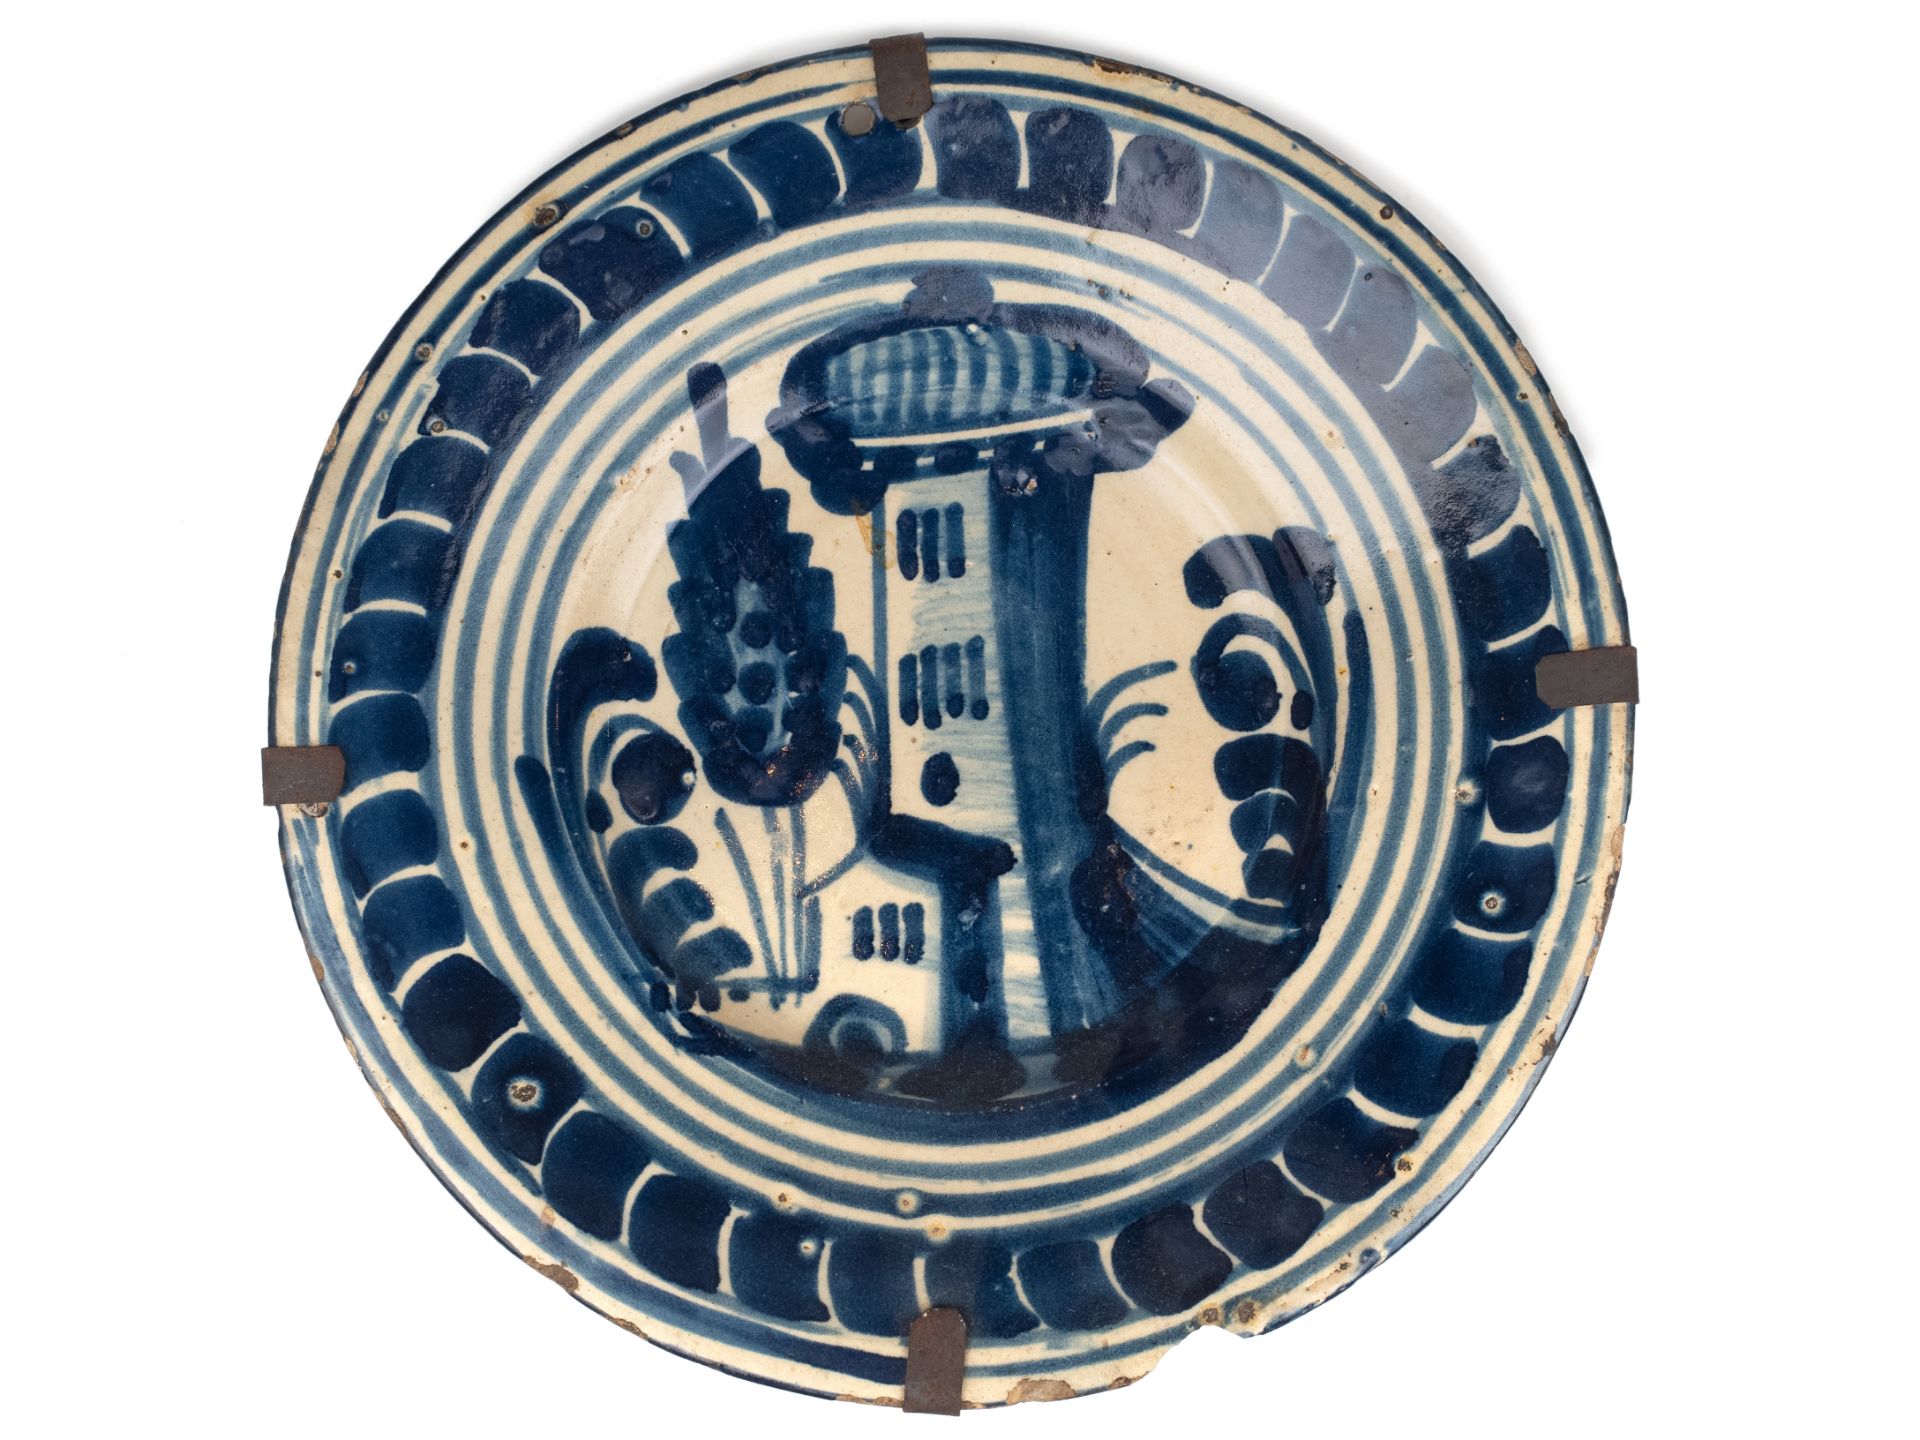 A 17th century plate in Catalan pottery of 'la ditada'